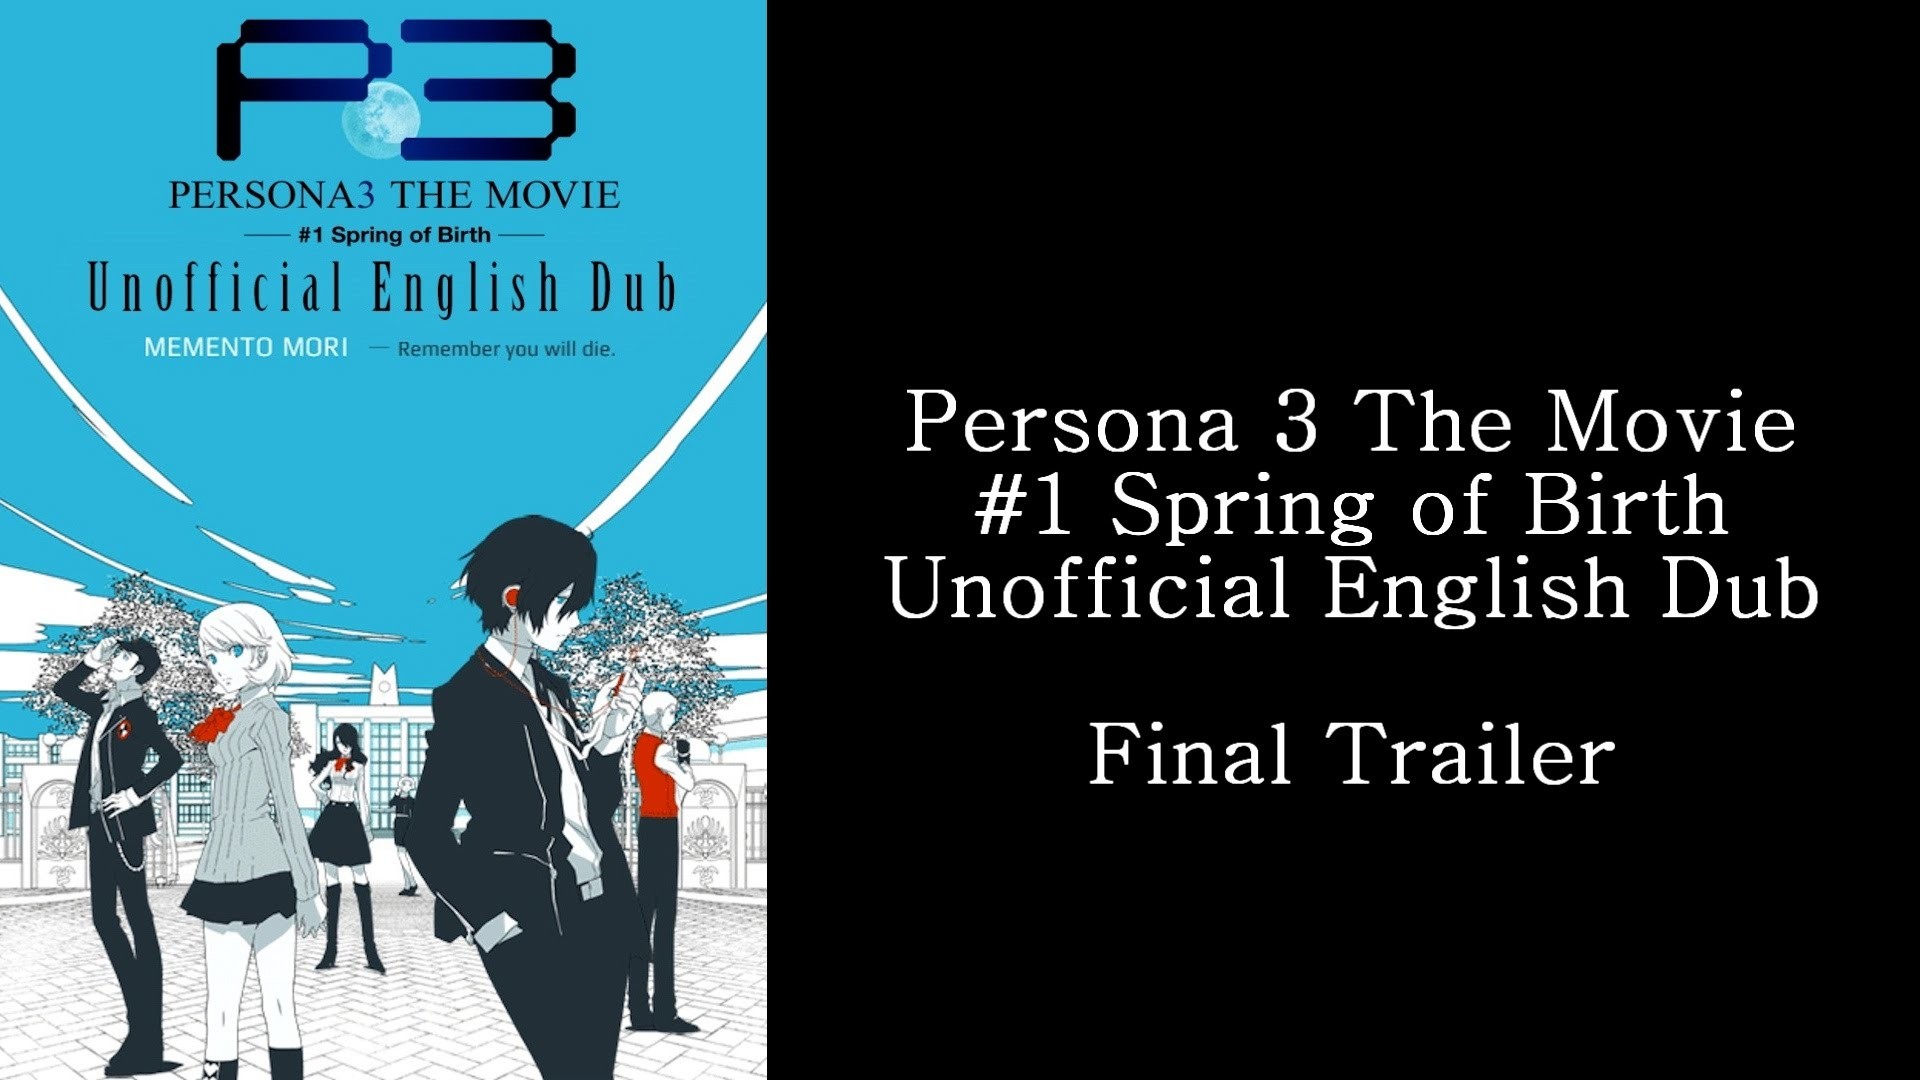 1920x1080 Persona 3 The Movie #1 Spring of Birth Unofficial English Dub Final Trailer  - YouTube